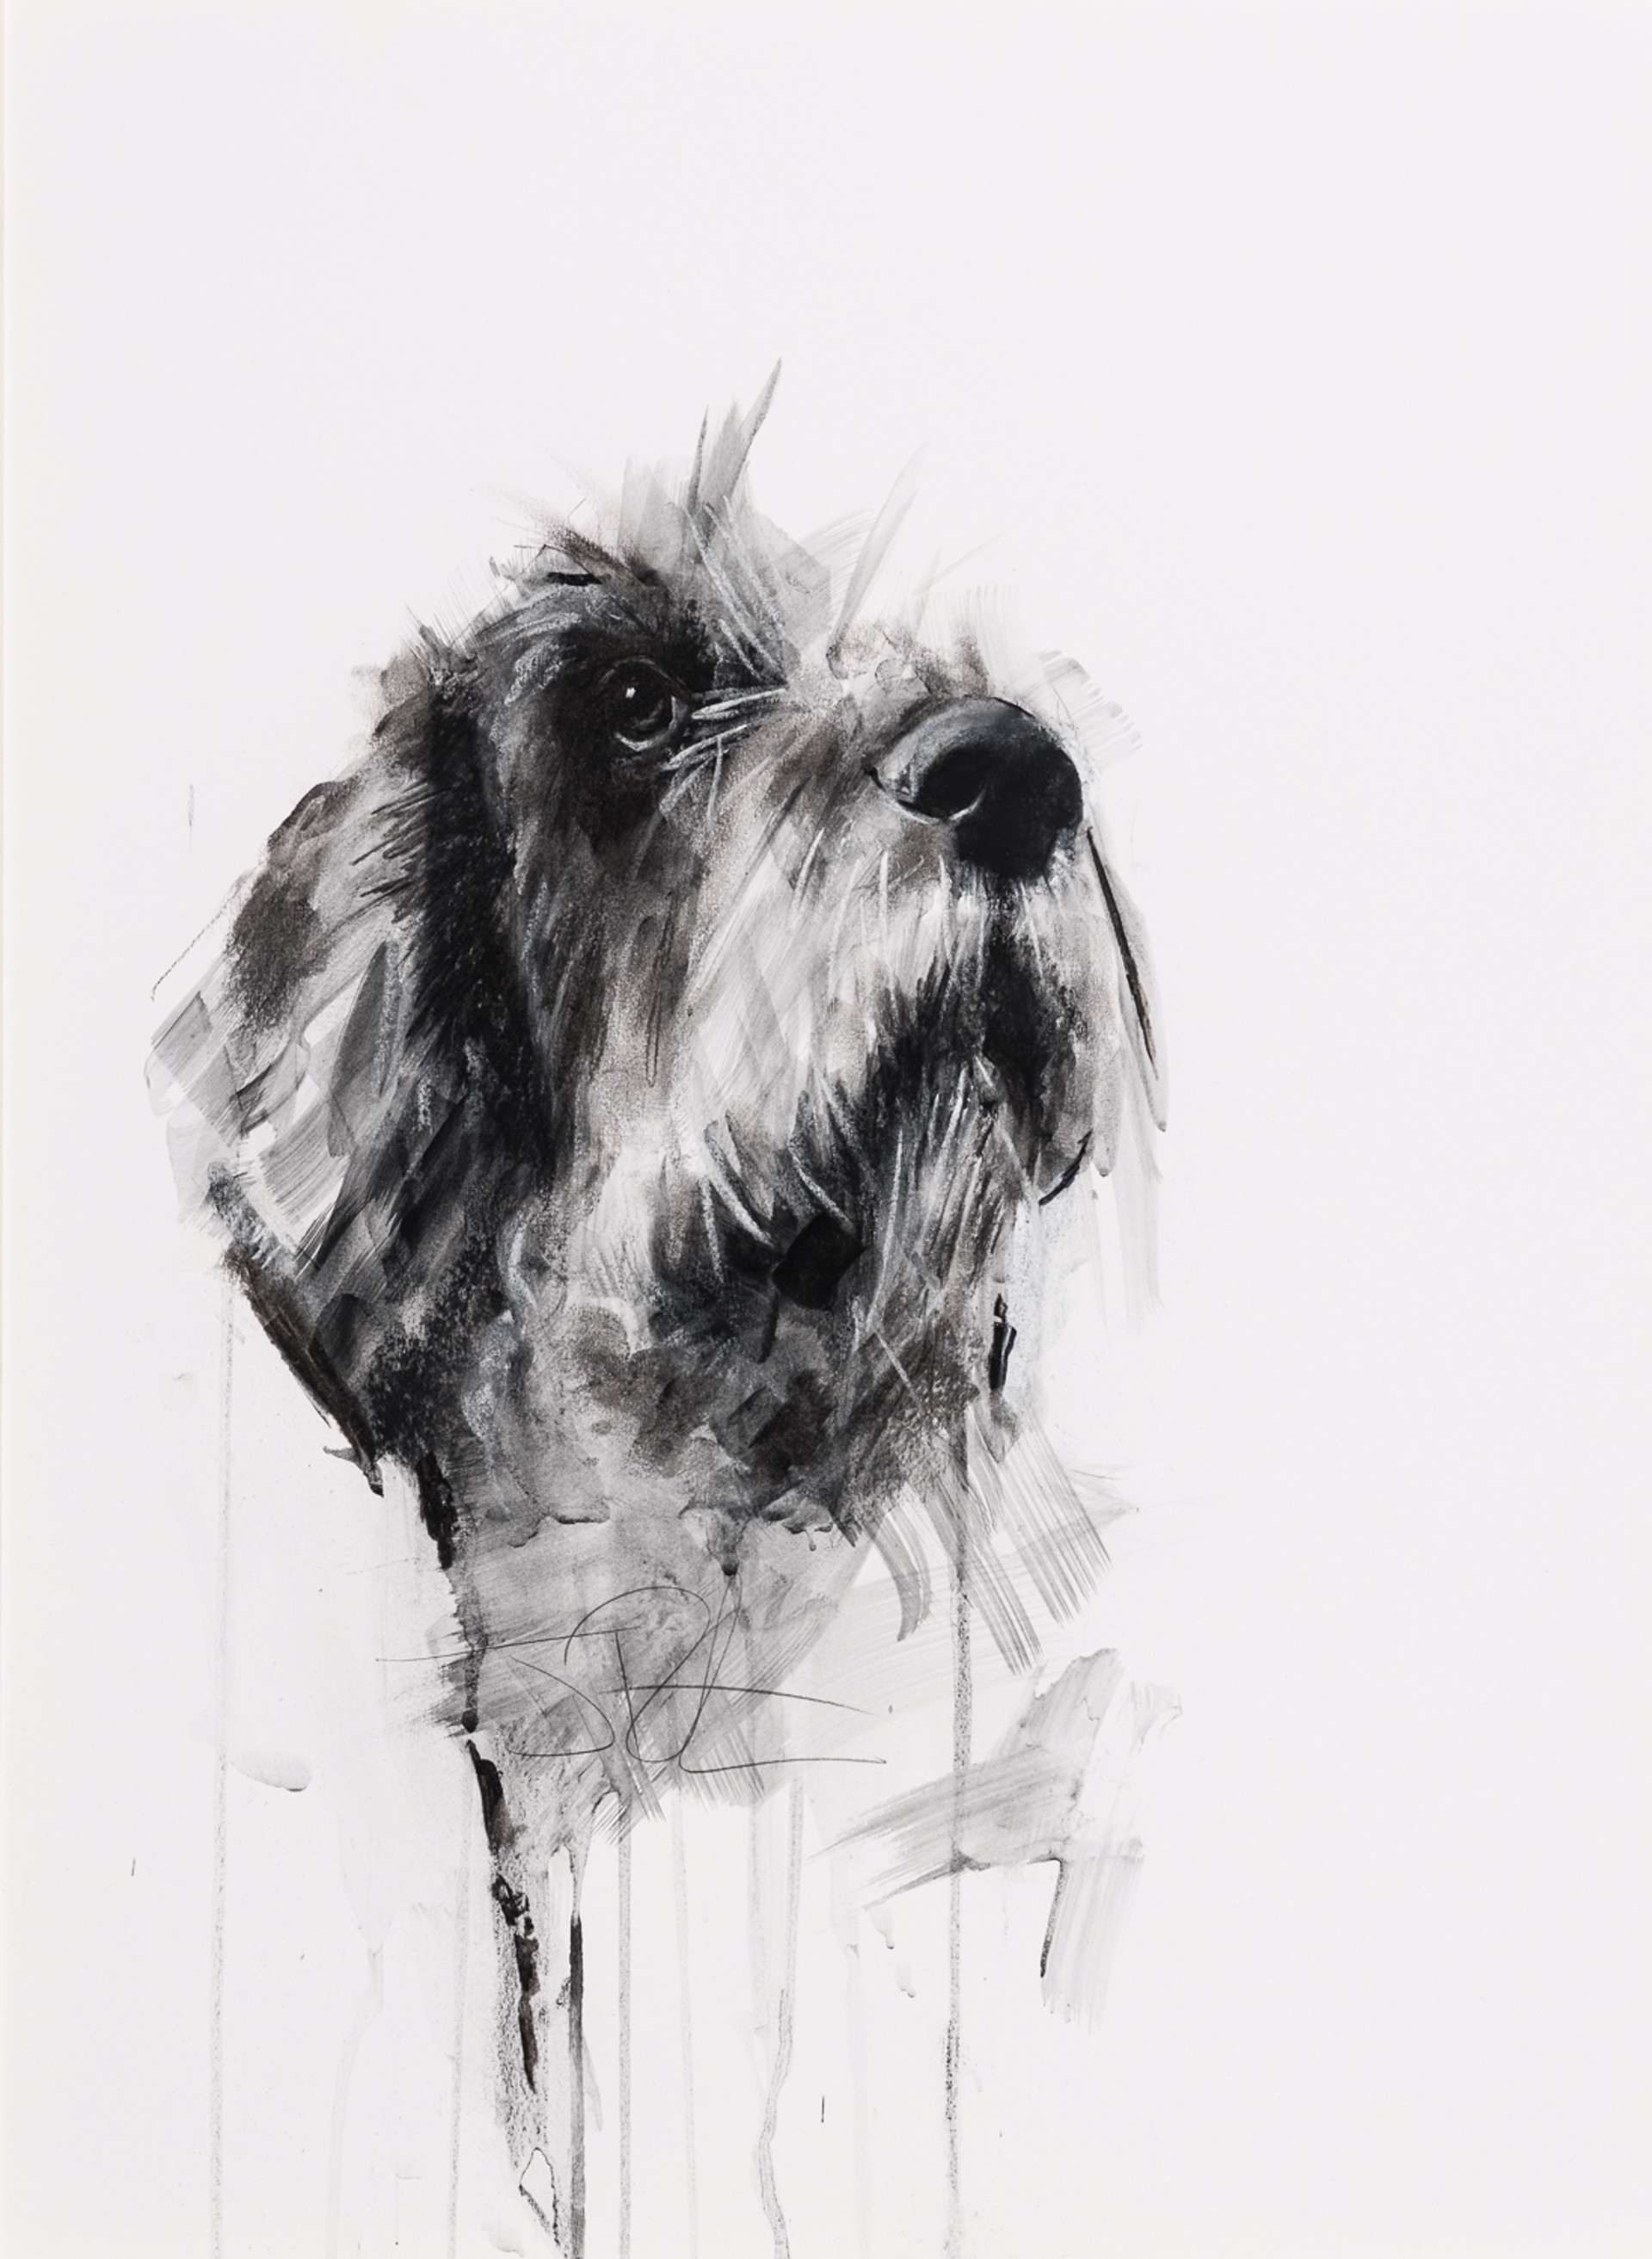 WIRE HAIRED by John Rotherham